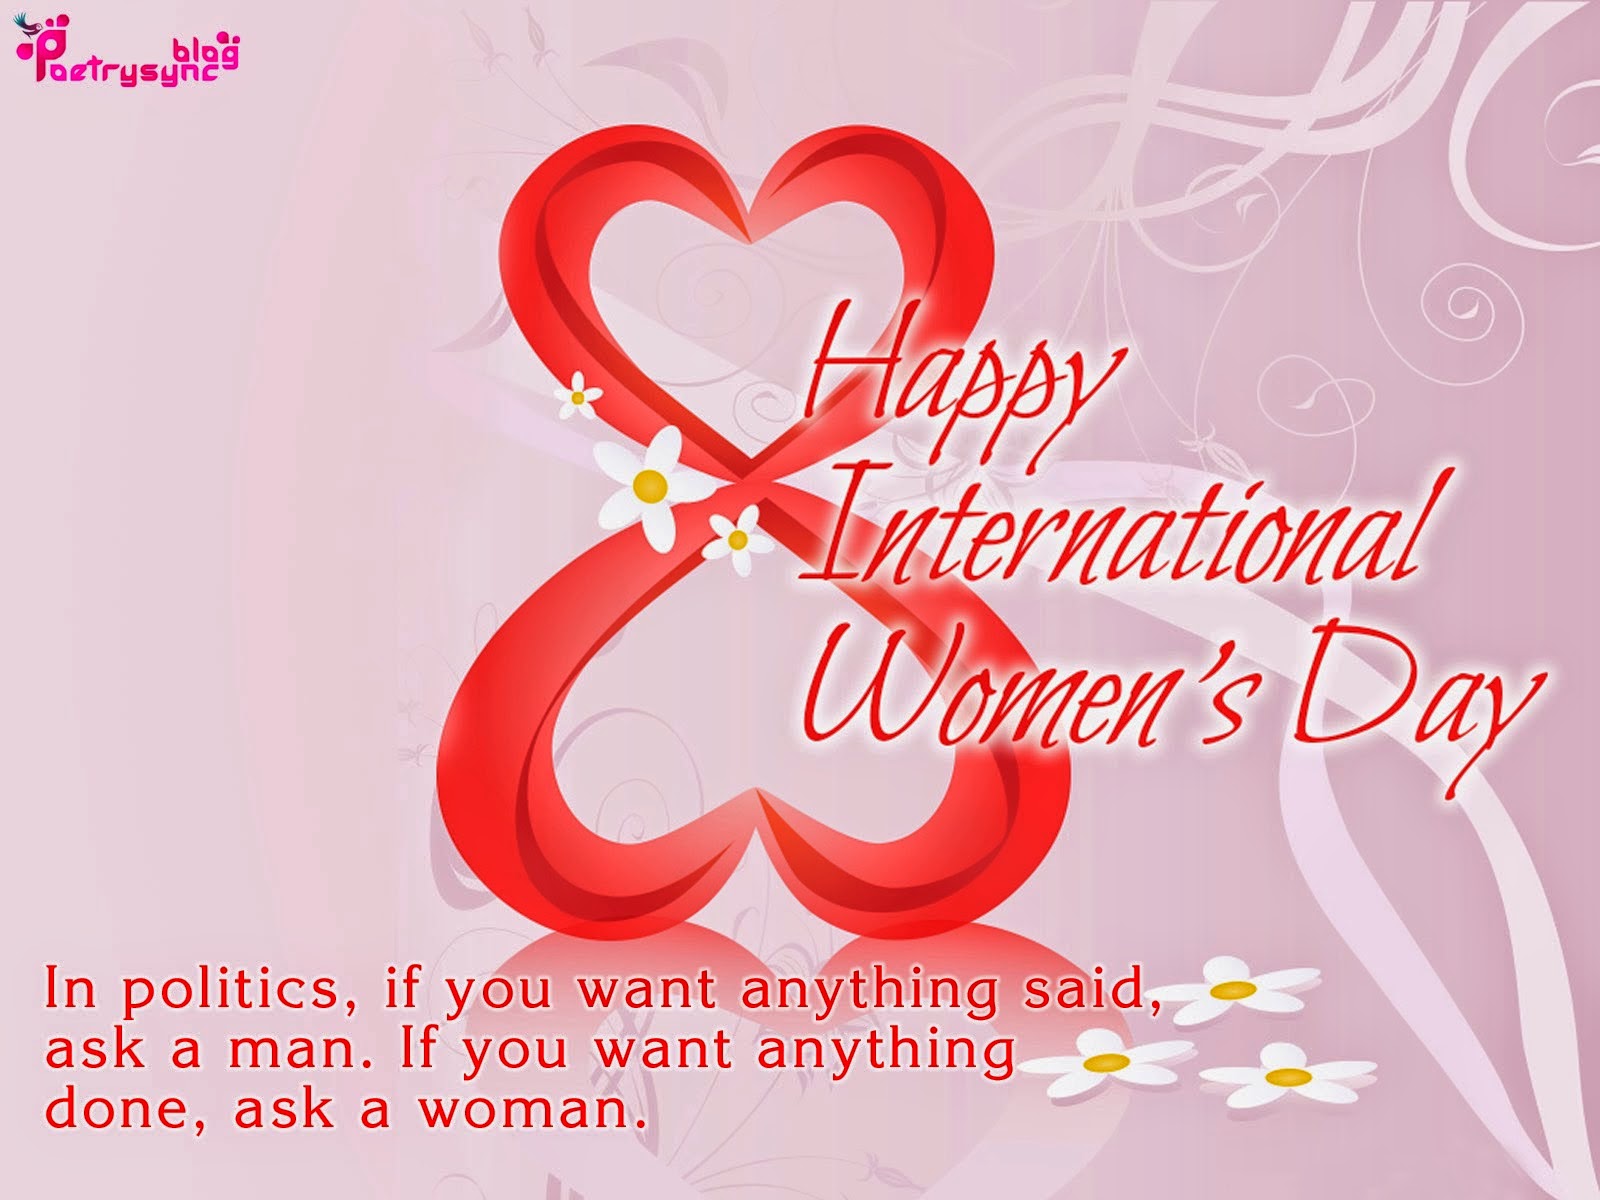 Women's Day, Women's Day Wallpaper, Women's Day Quotes - 8 March International Womens Day Quotes , HD Wallpaper & Backgrounds